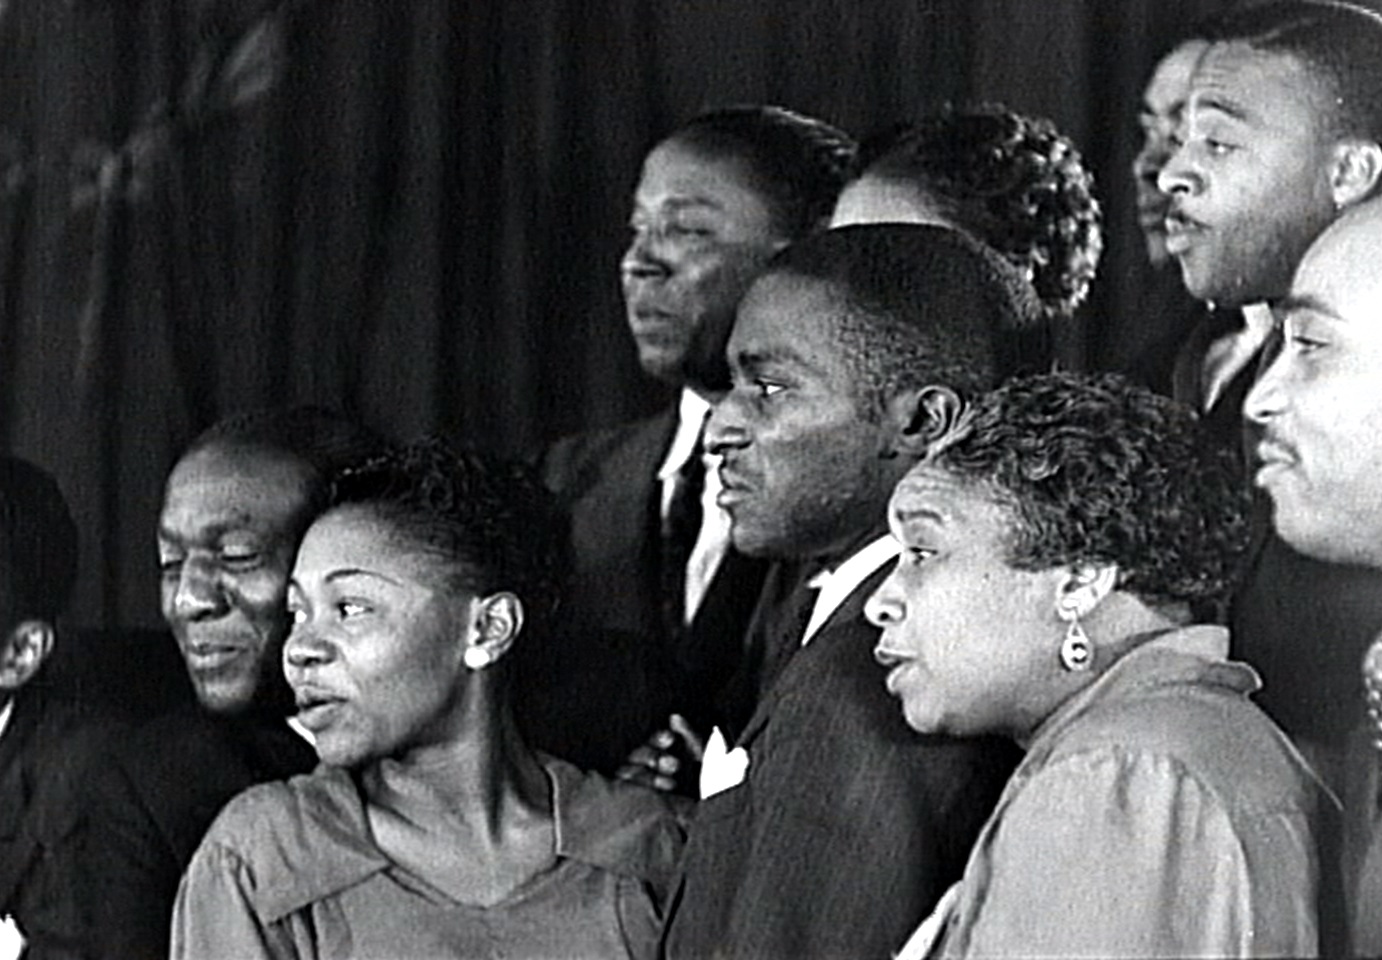 A choir directed by Juanita Hall sings "Ezekiel Saw the Wheel" in New York City, 1937. Filmed by the Works Progress Administration (WPA); used by permission of www.criticalpast.com.